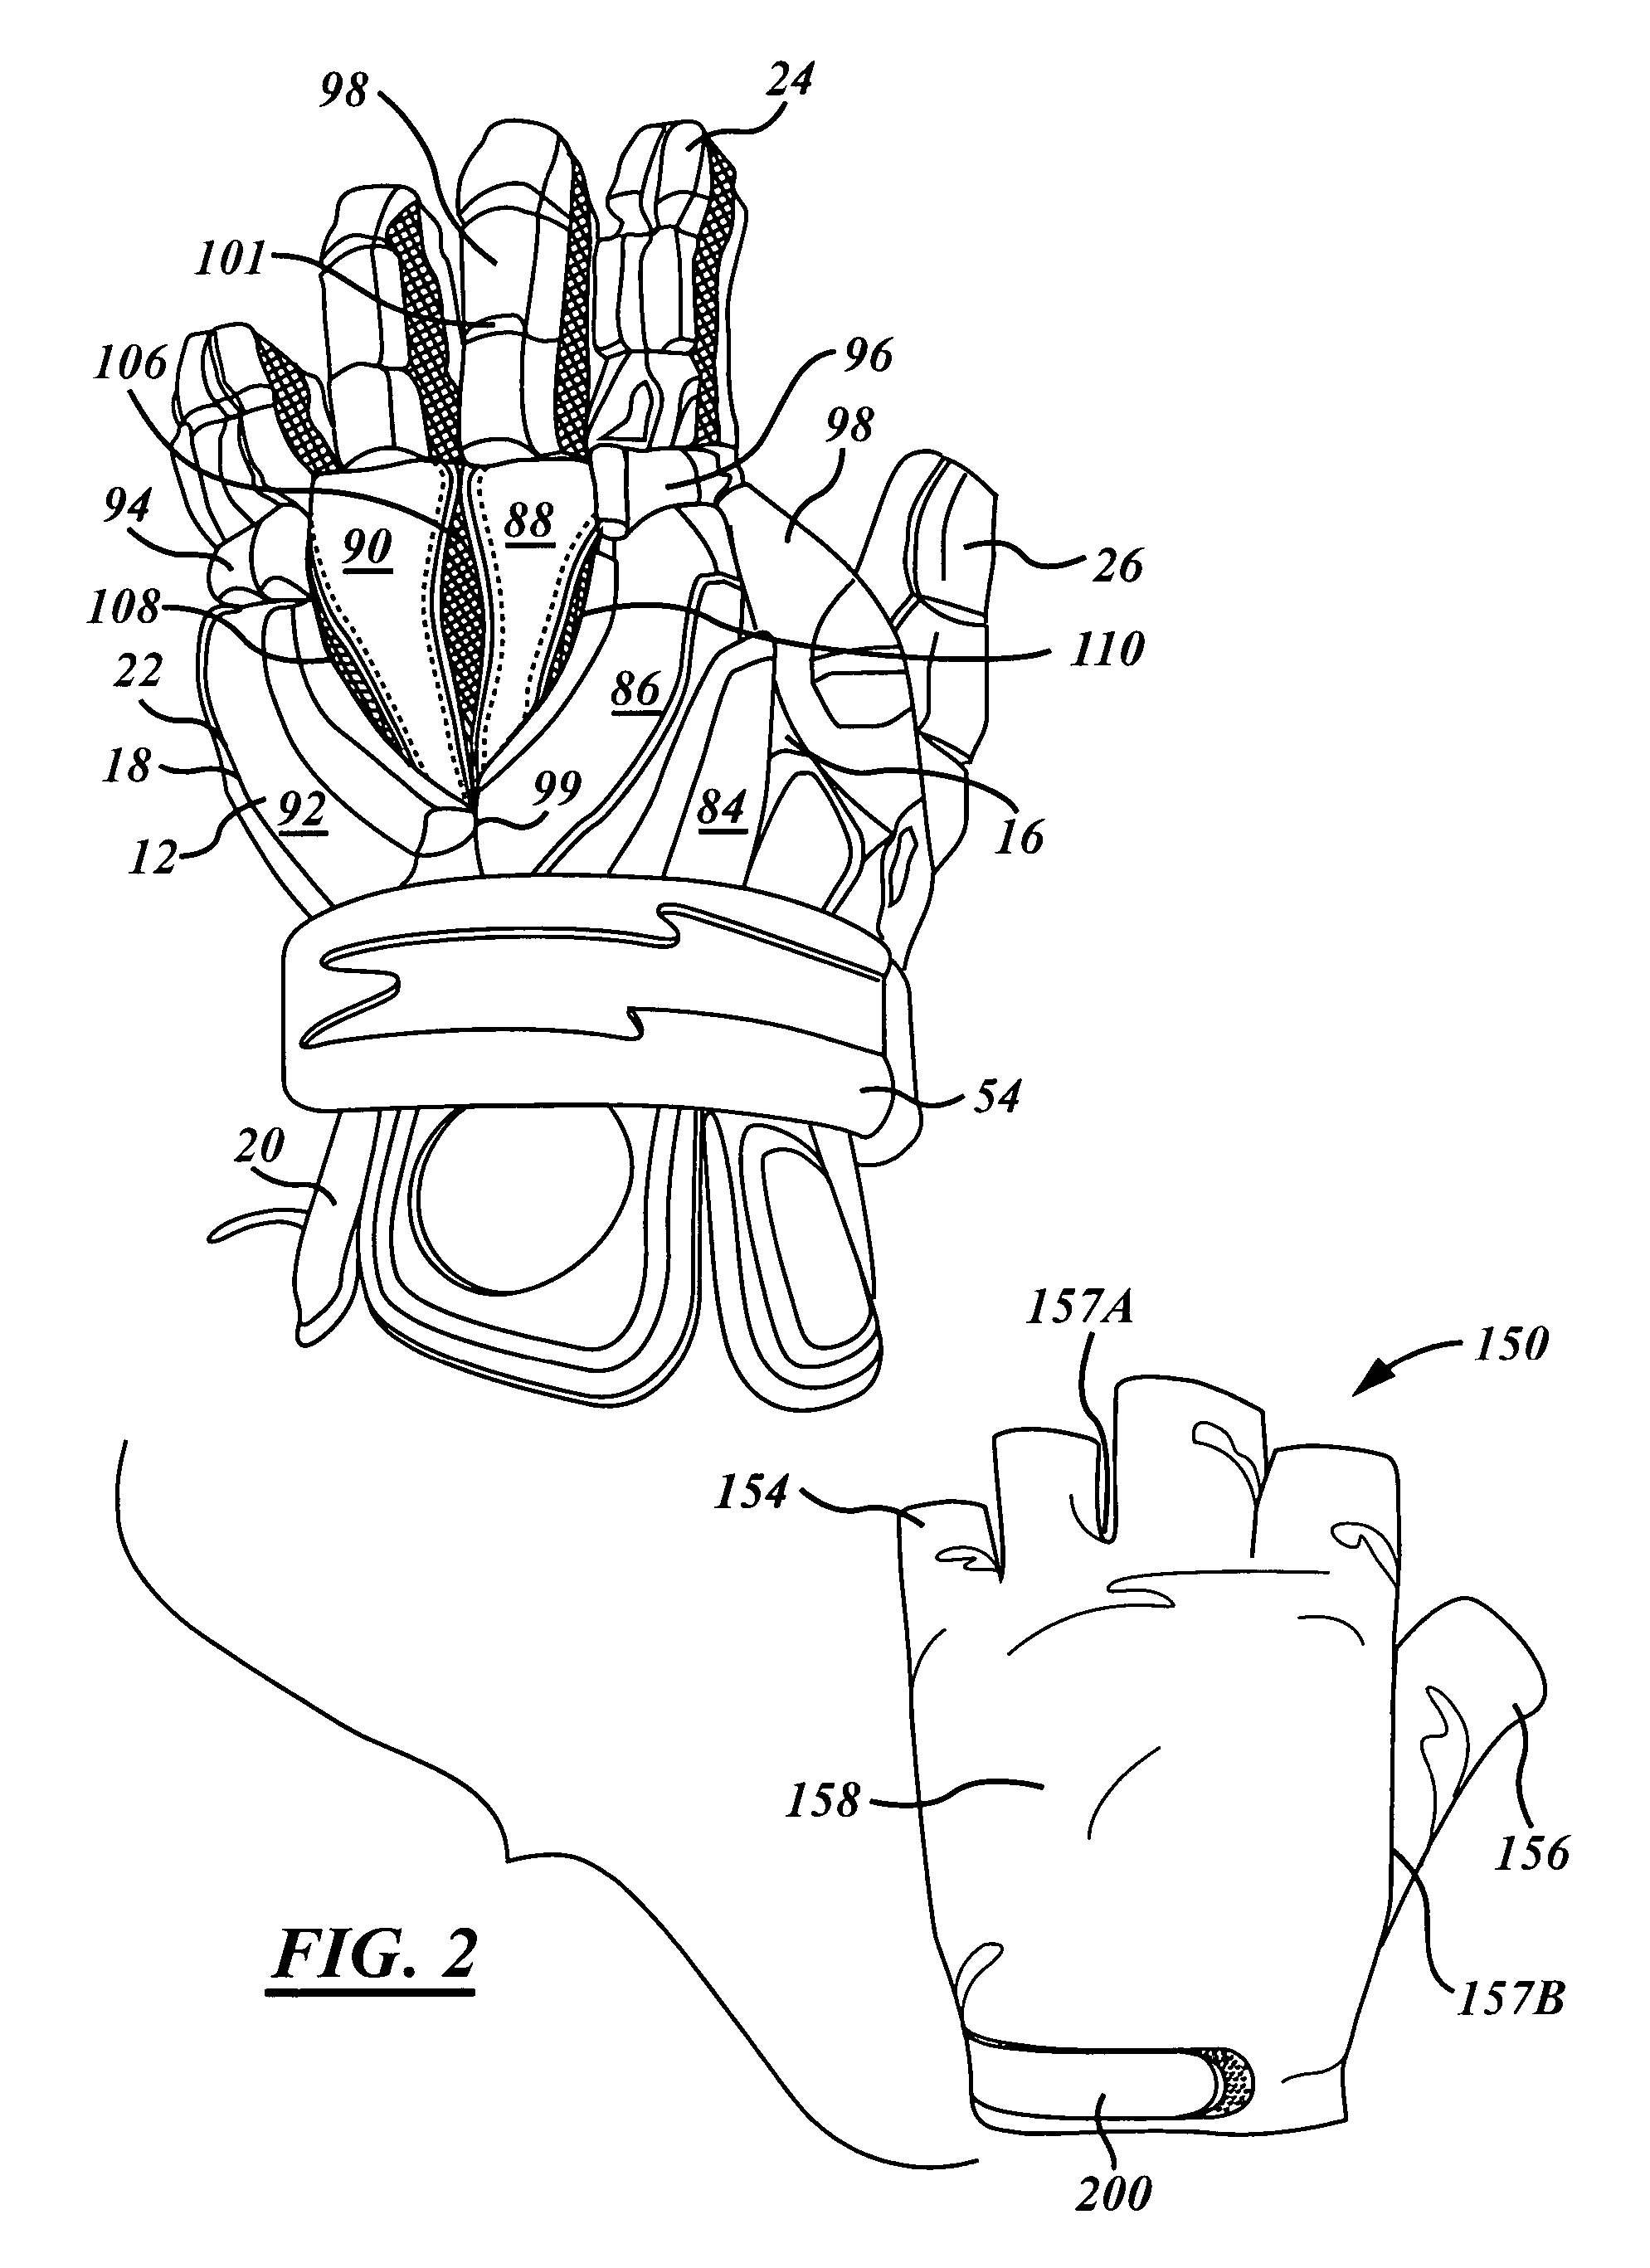 Protective glove having a padded palmless outer glove and form-fitting inner glove